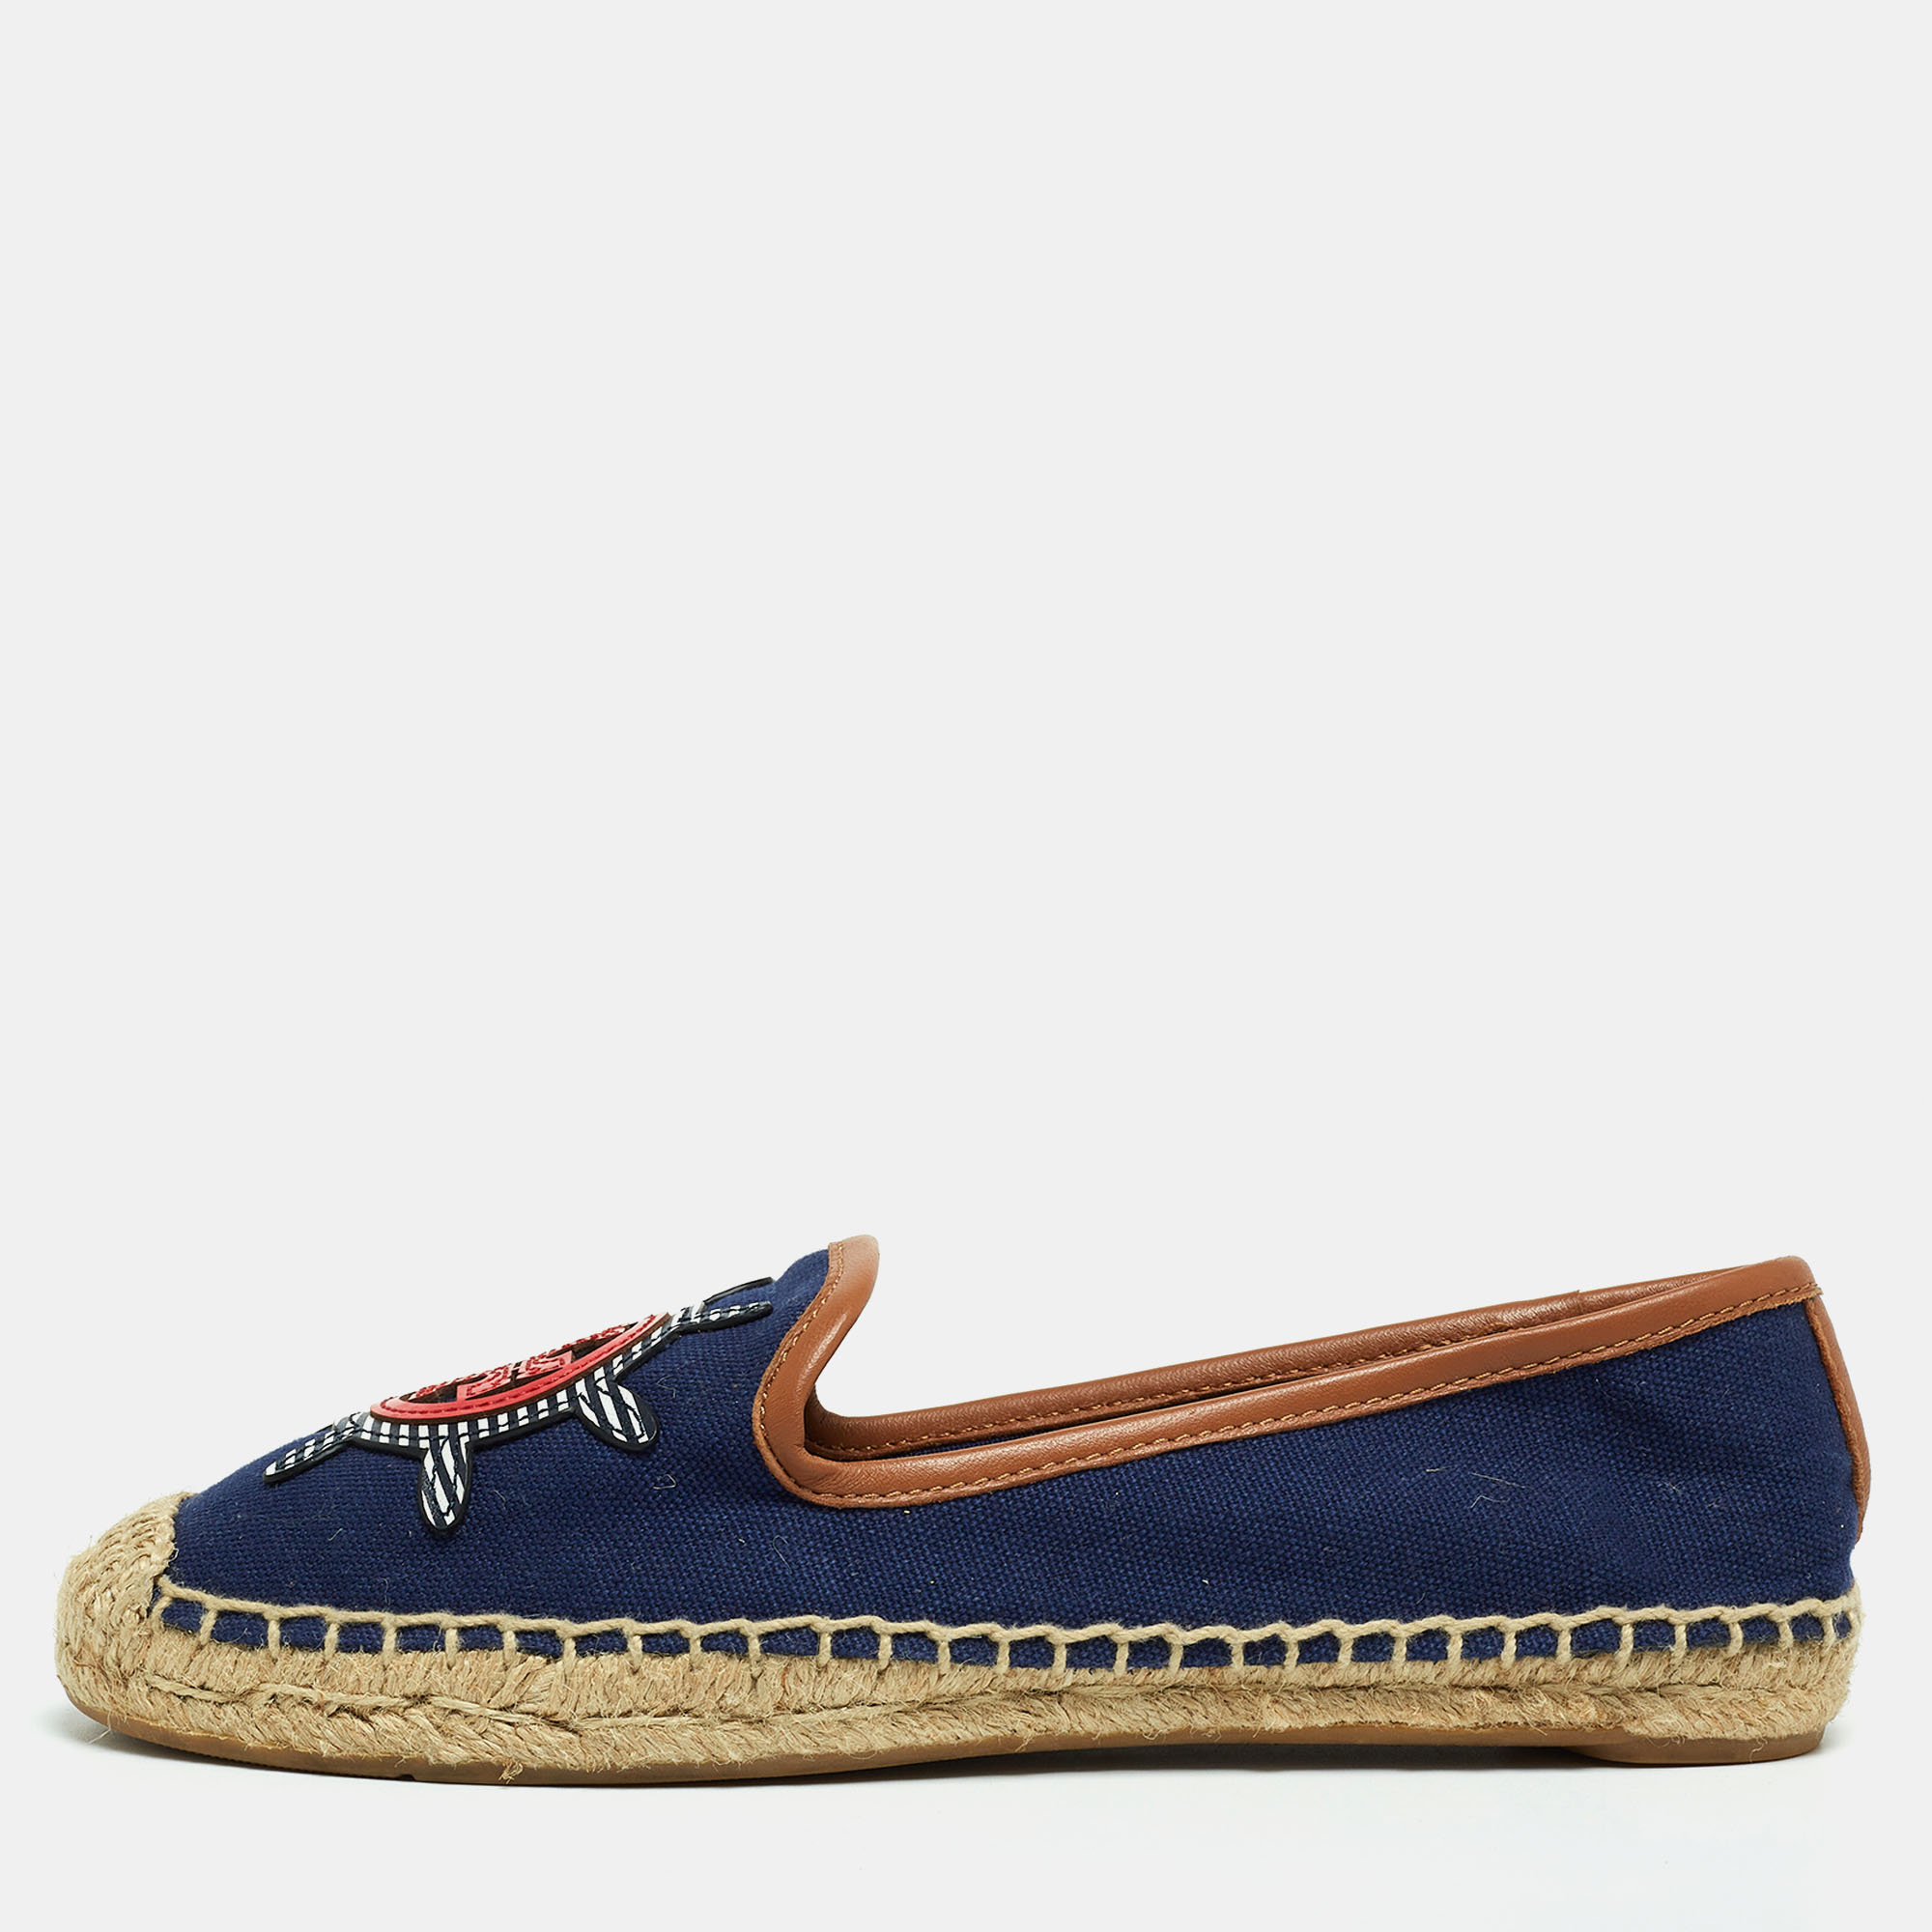 Tory Burch Navy Blue Canvas And Leather Espadrilles Flats Size 38